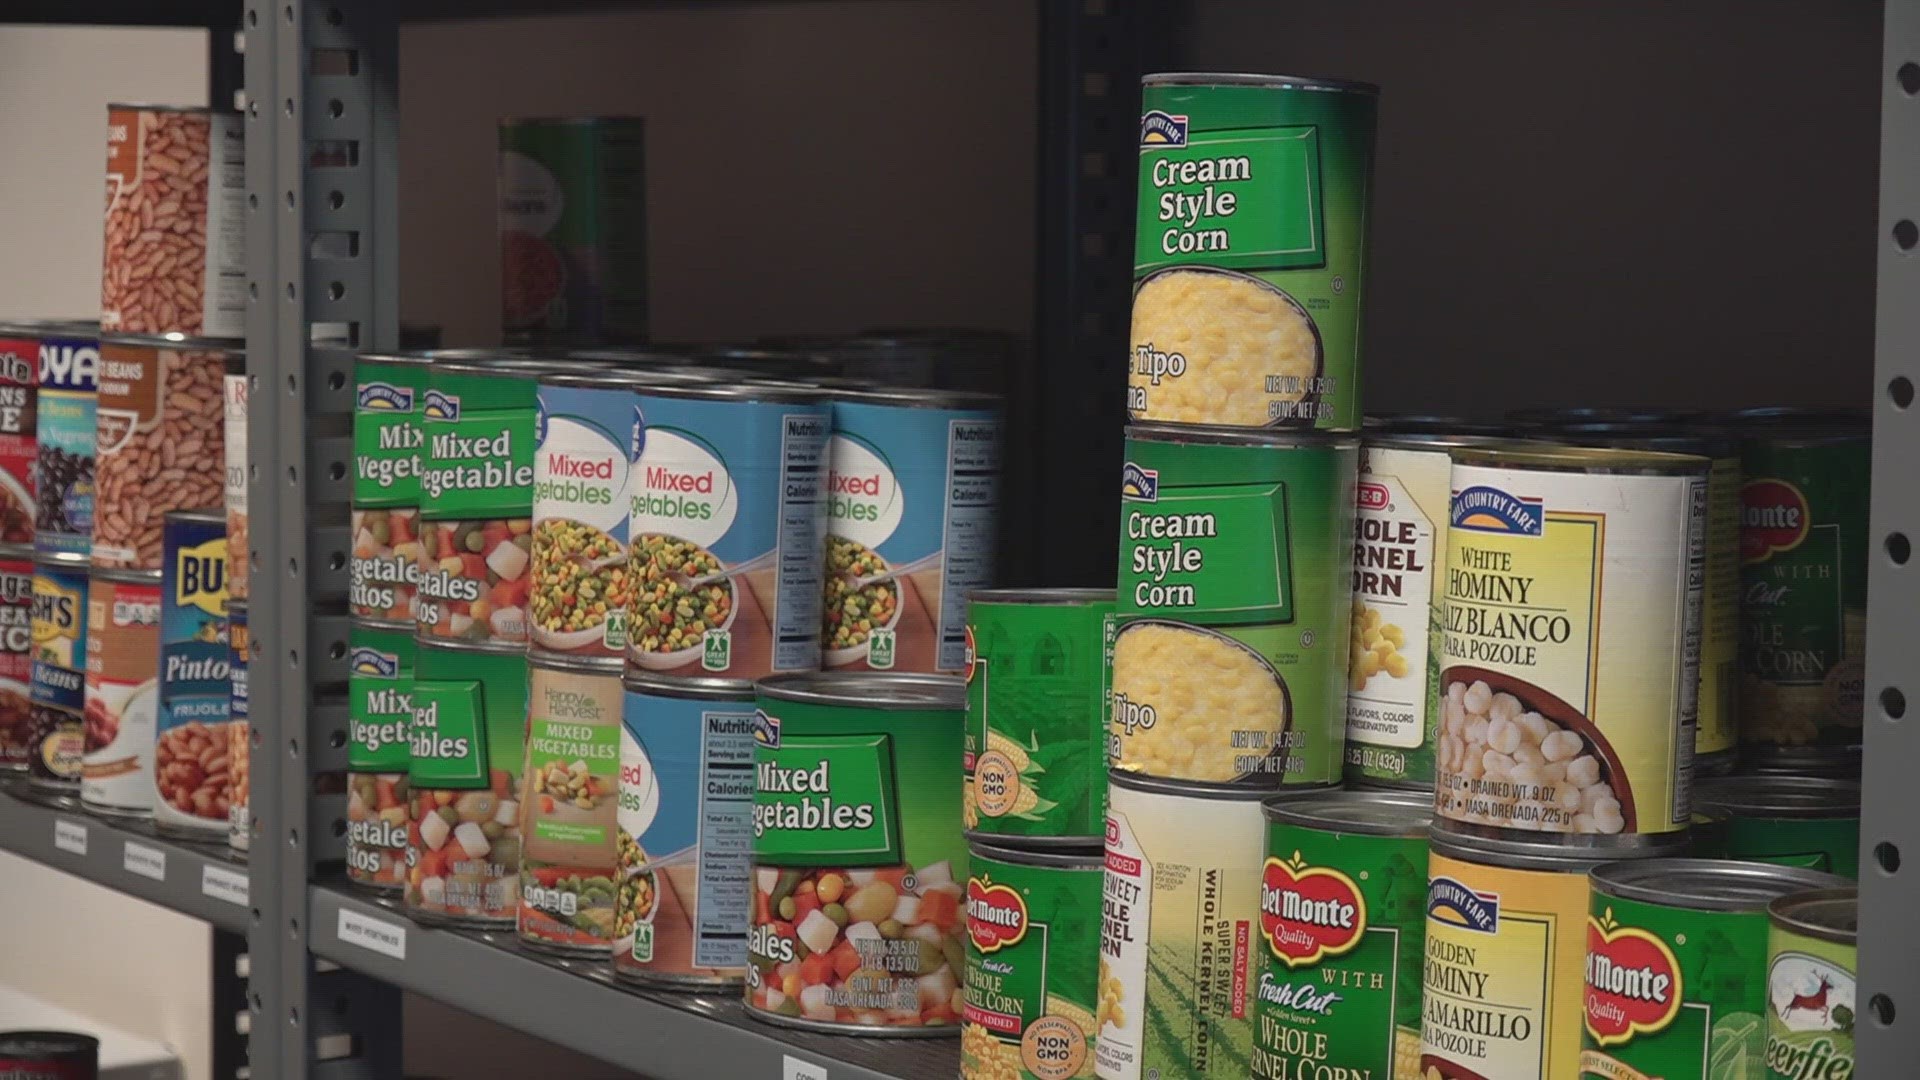 The pantry is helping at least 10 students each week.